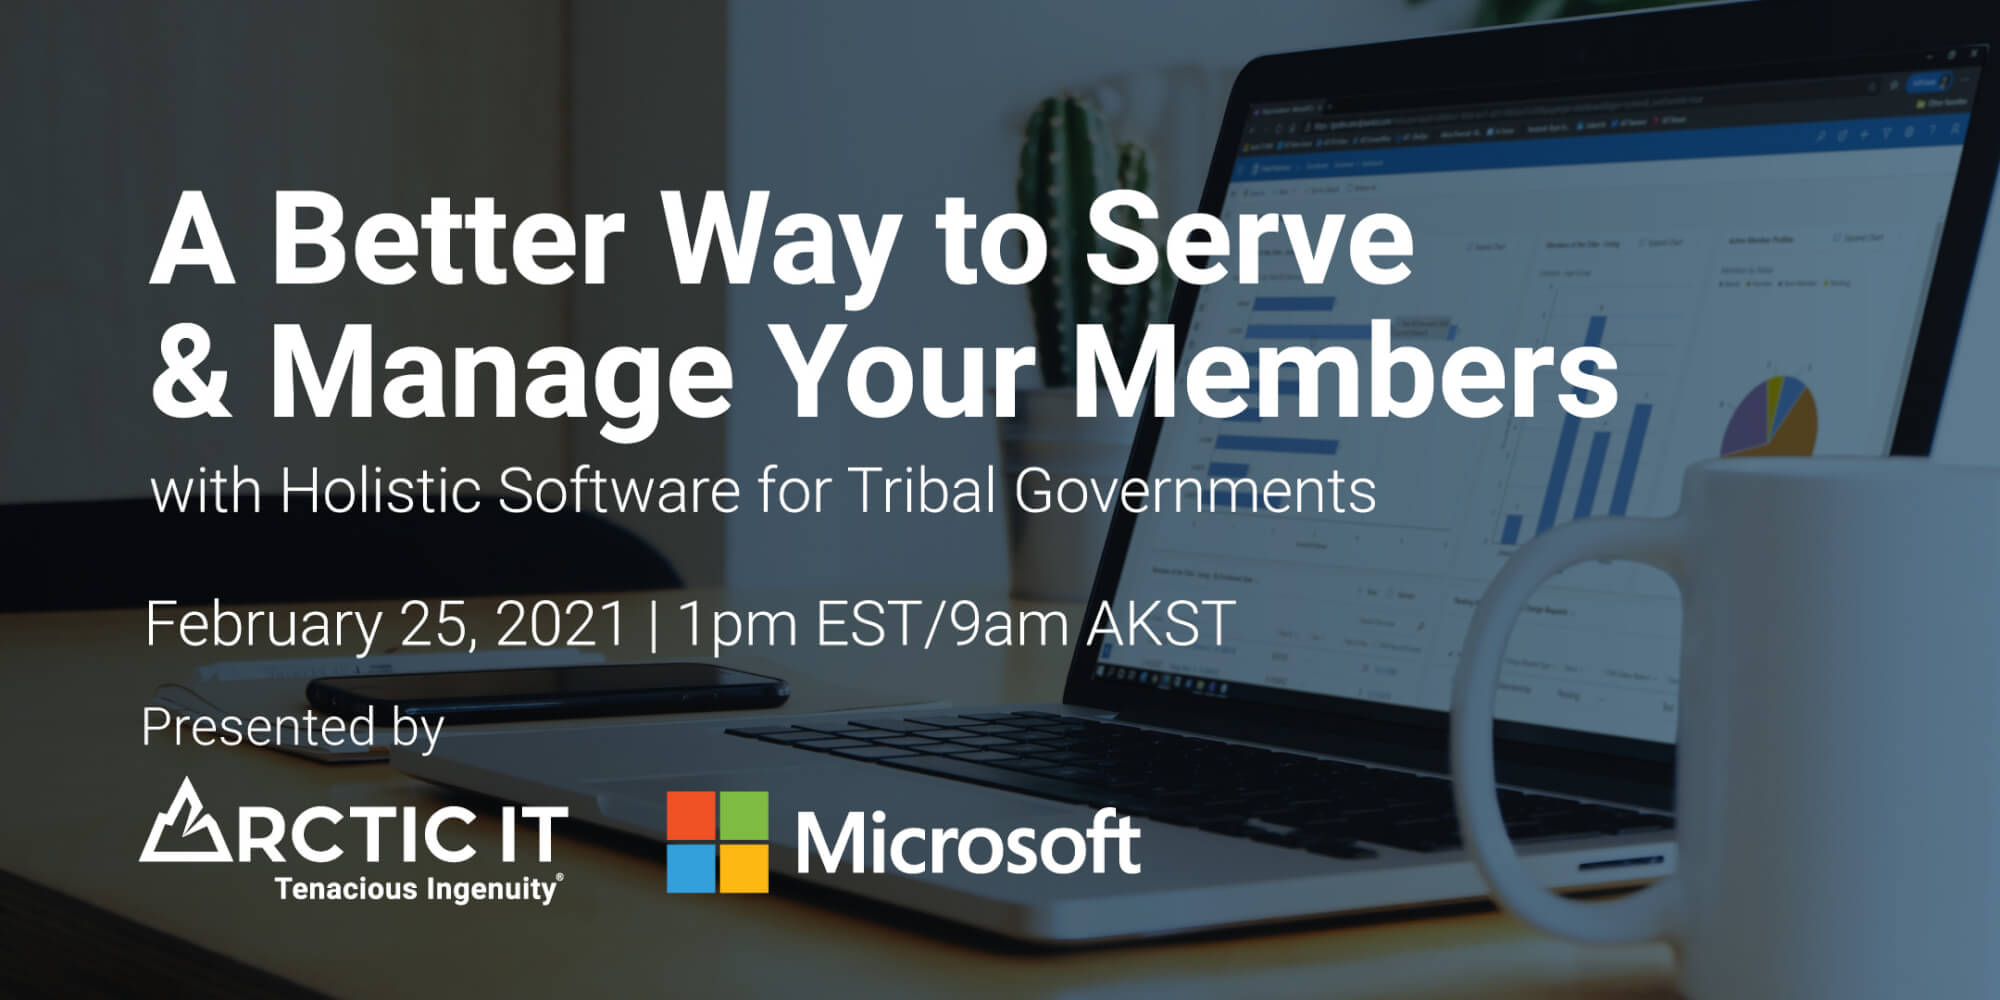 Simplify & Modernize Your Finance Technology for Tribal Governments